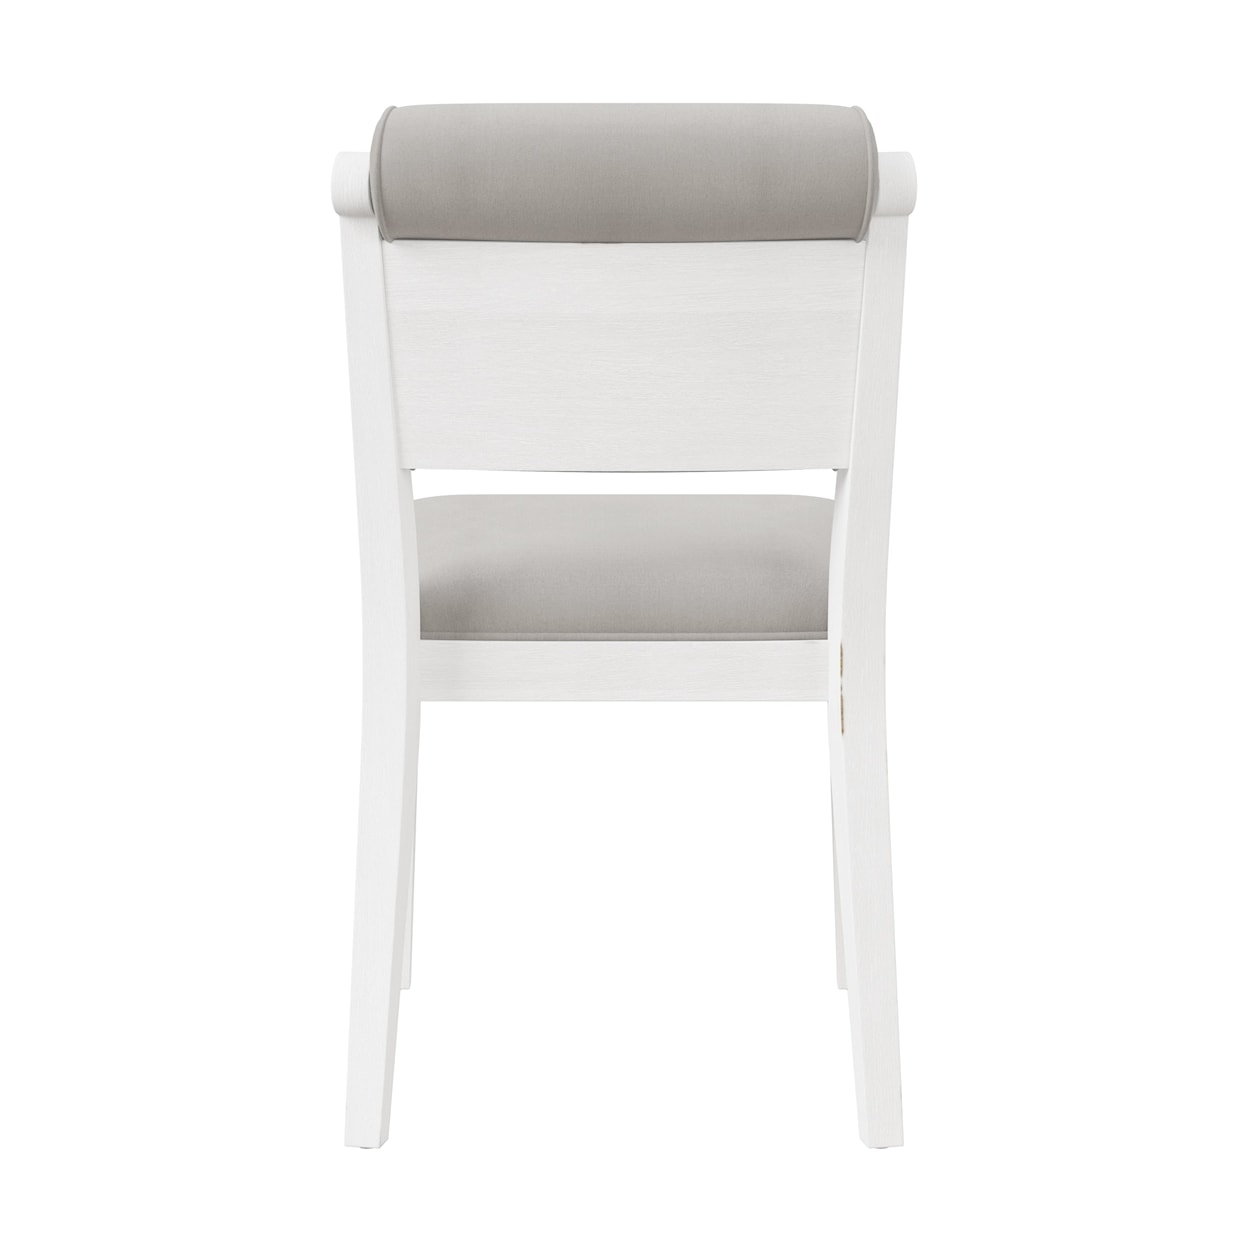 Hillsdale Clarion Dining Chairs